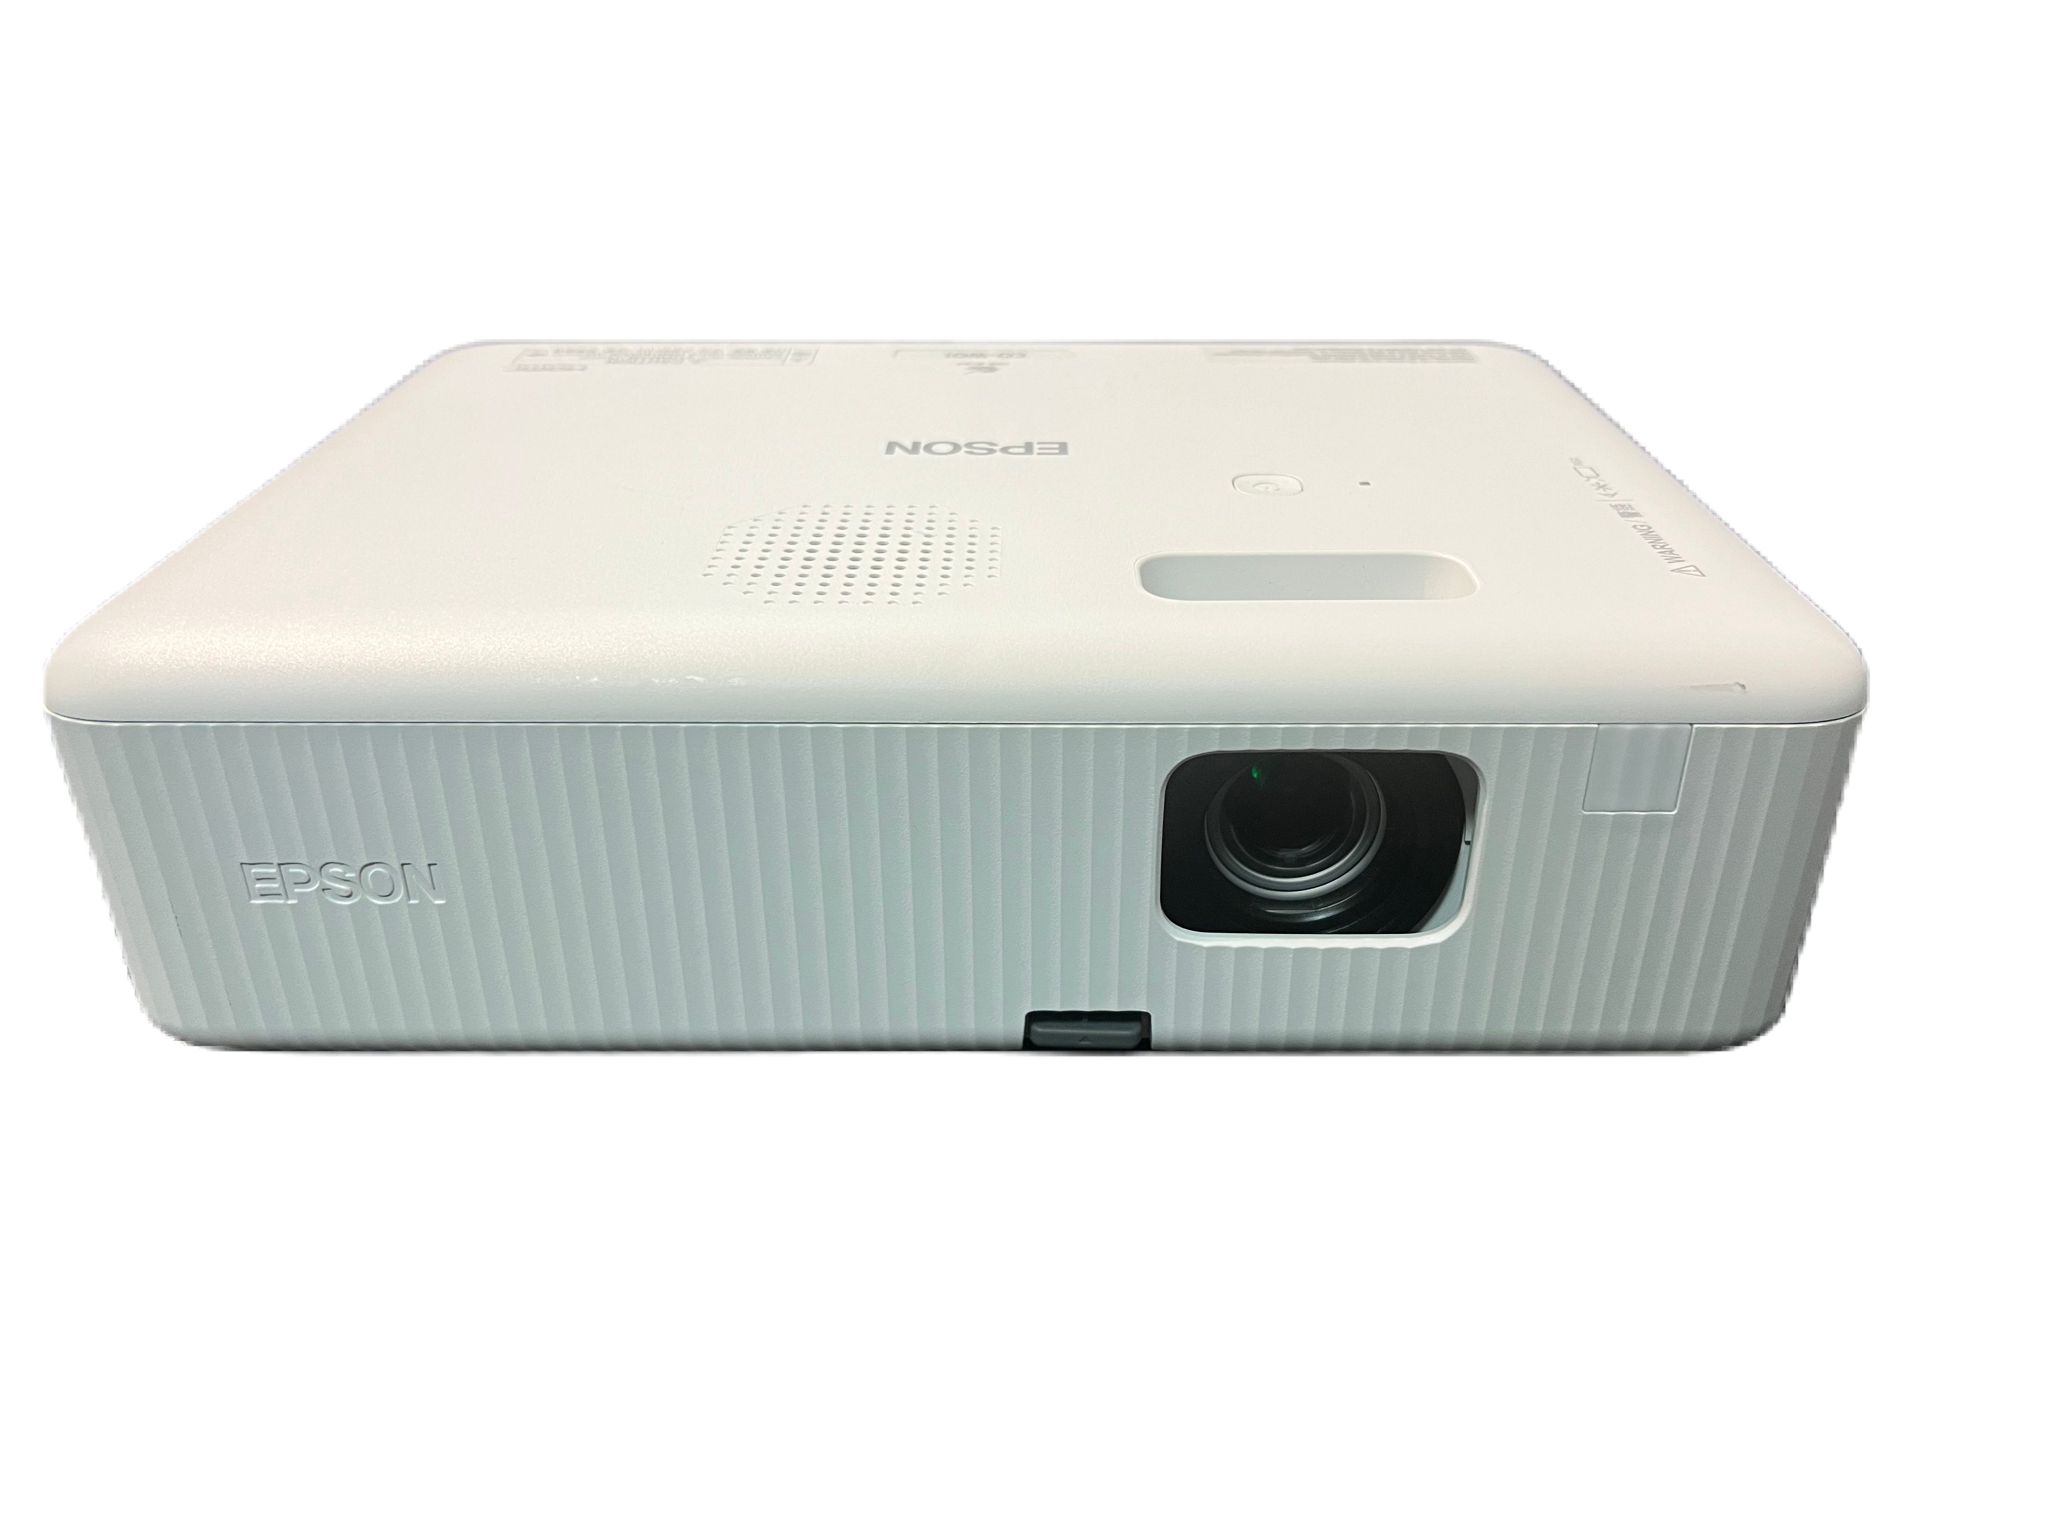 Epson Projector cow01 - No Remote Included